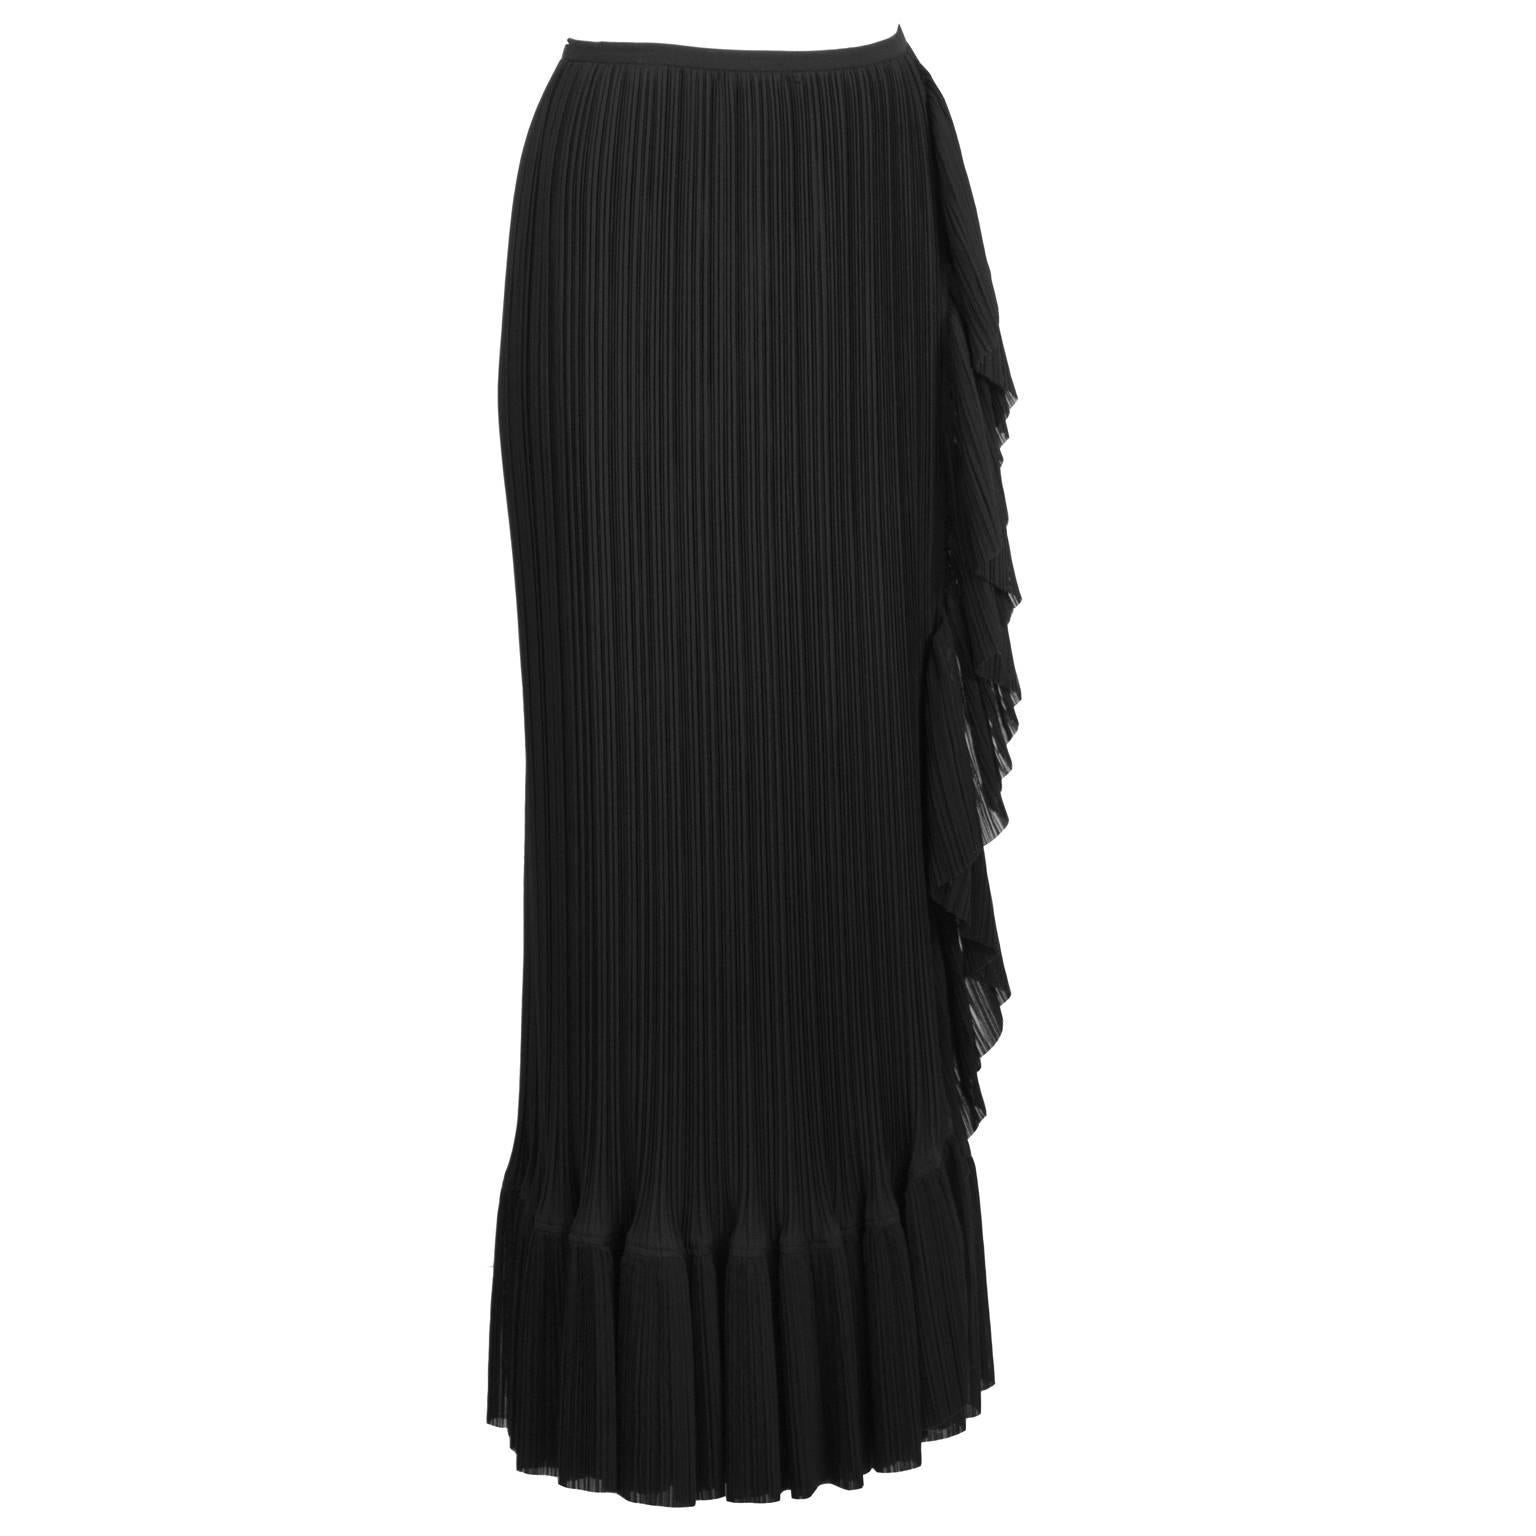 Lovely Issey Miyake pleated black skirt from the 2000s. Wrap style mid-length skirt featuring a frill hem and side zip closure. Excellent vintage condition. Fits like a US 6. 